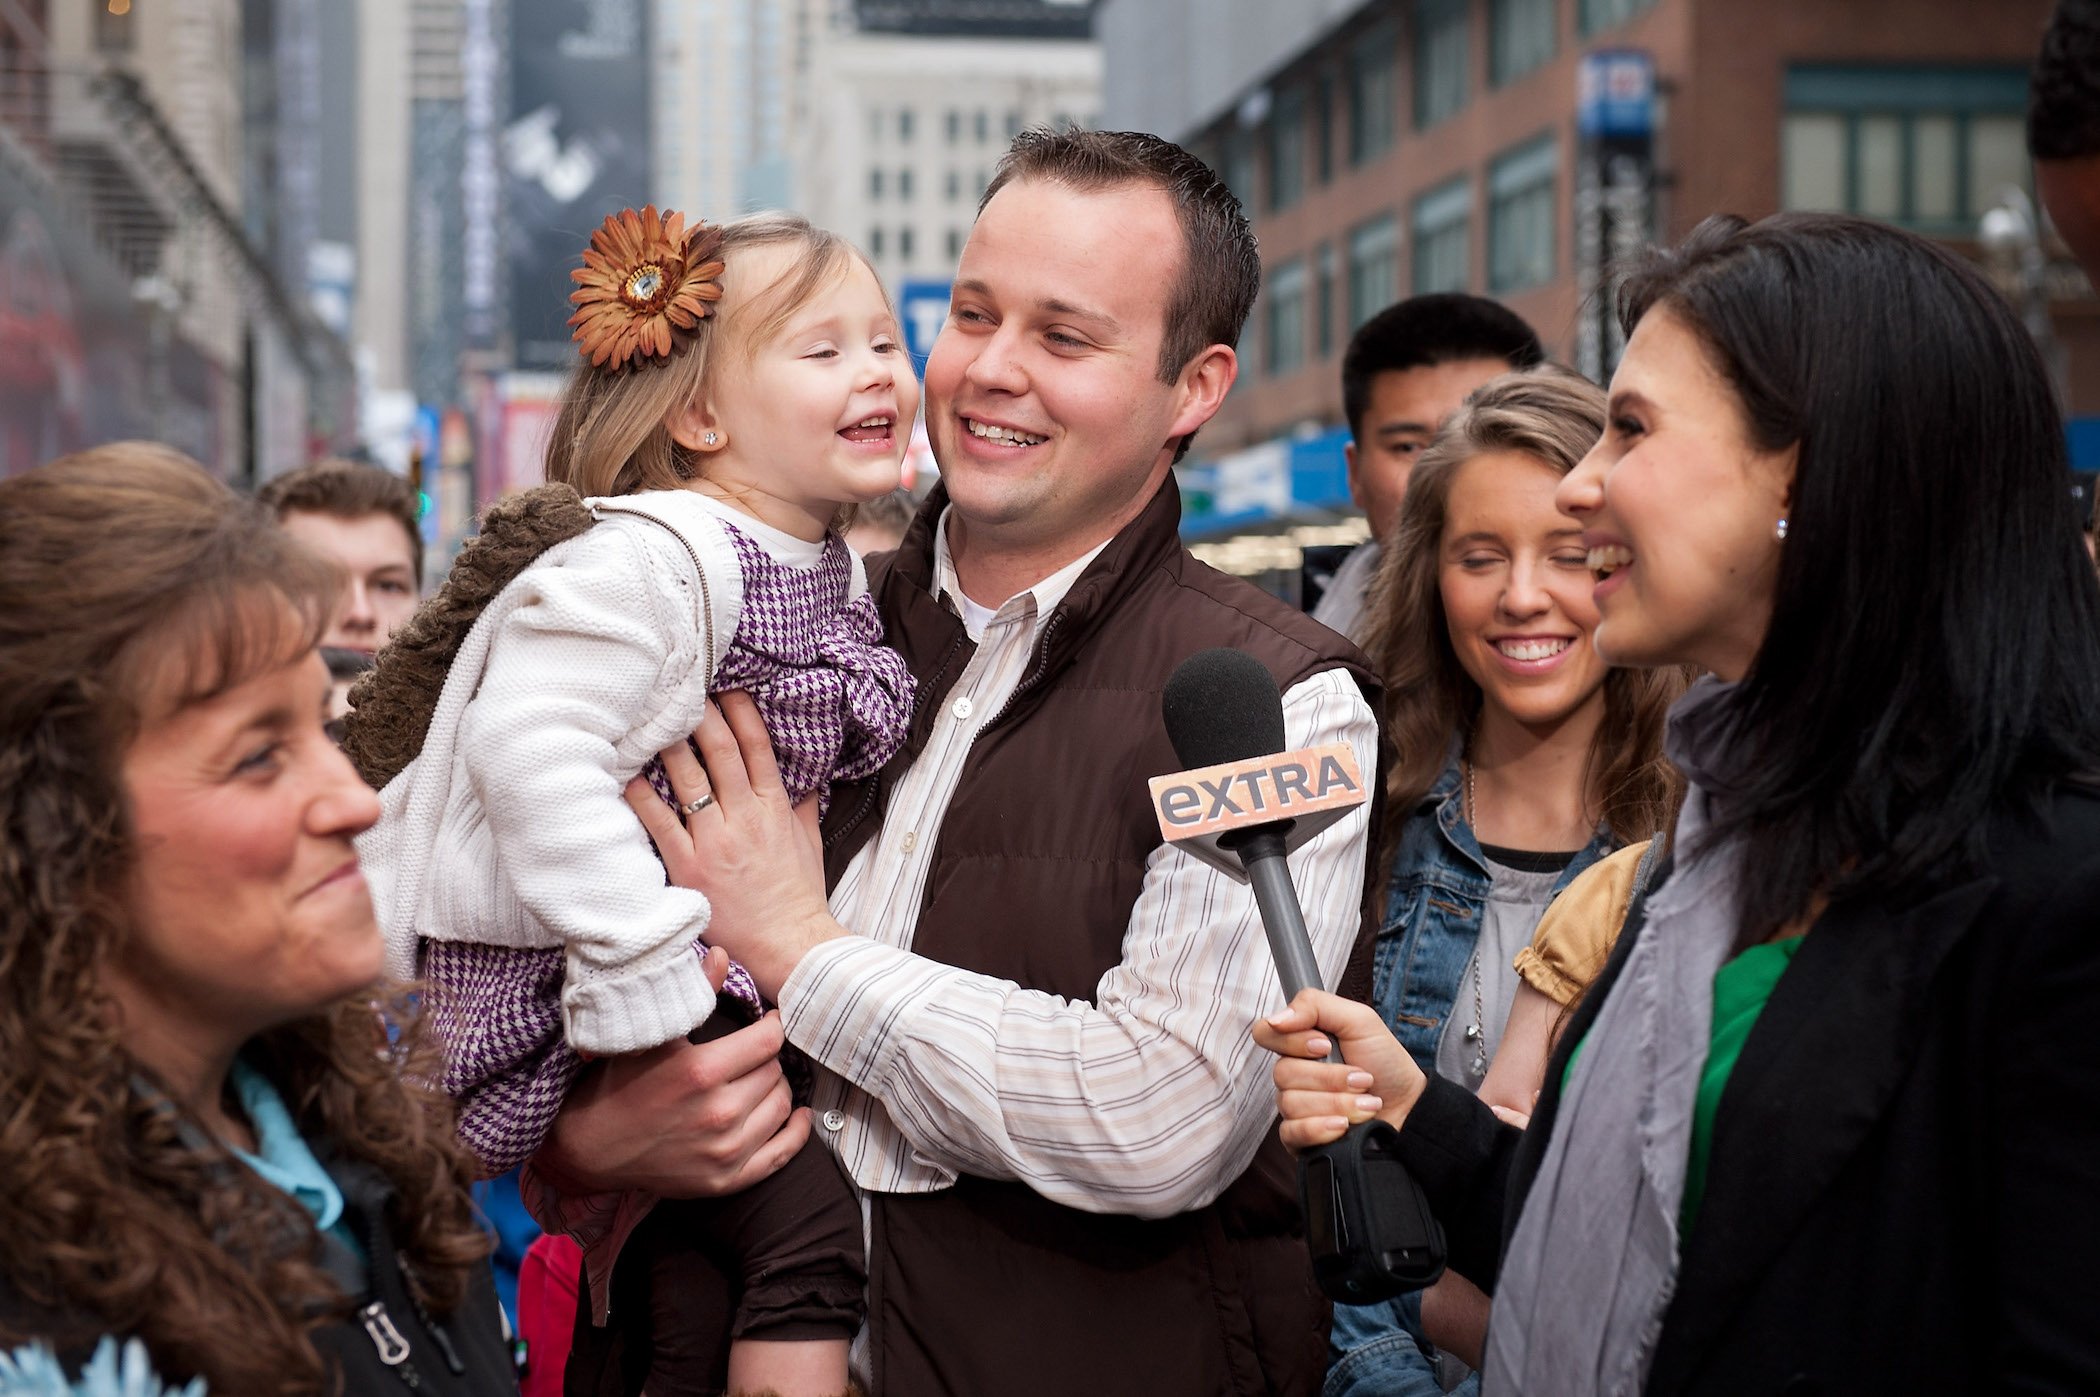 Josh Duggar and his daughter during their visit with 'Extra' in Times Square, surrounded by the rest of the Duggar family